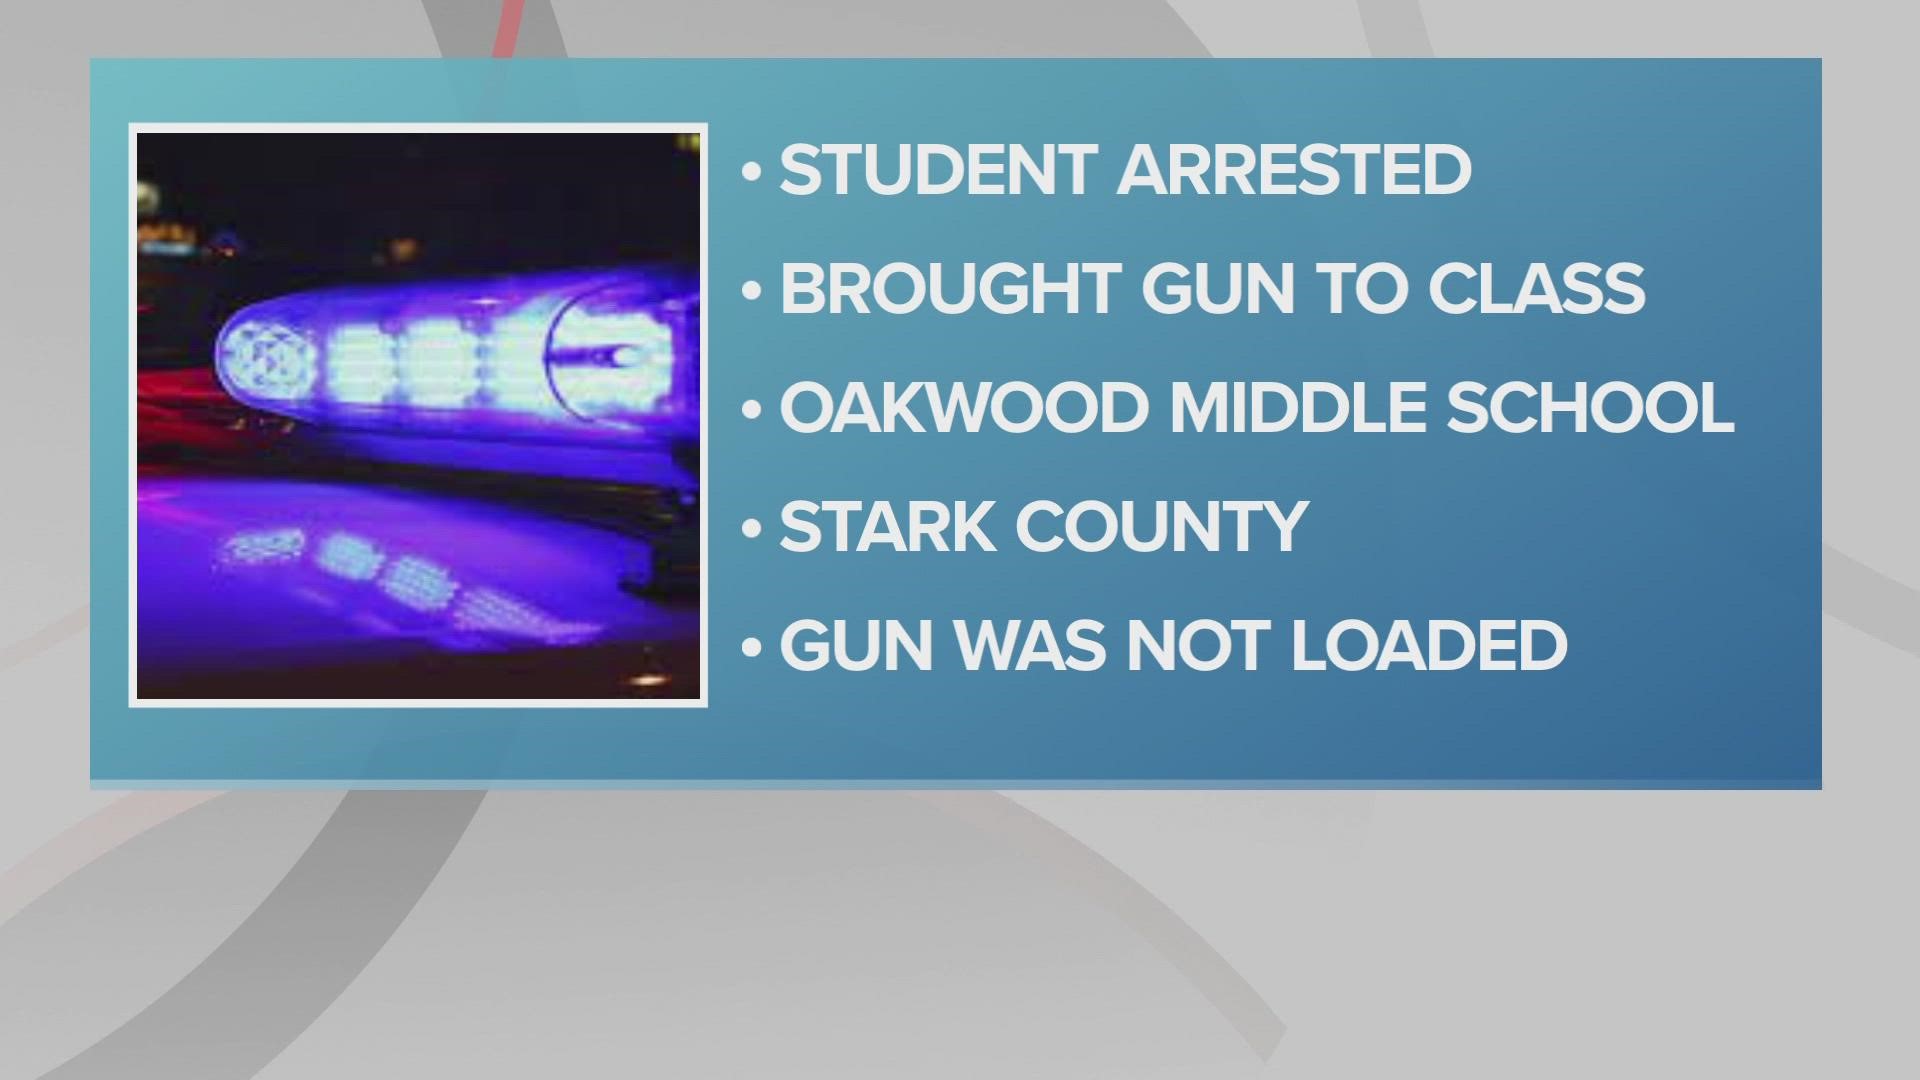 The Stark County Sheriff's Office says that the gun was not loaded.